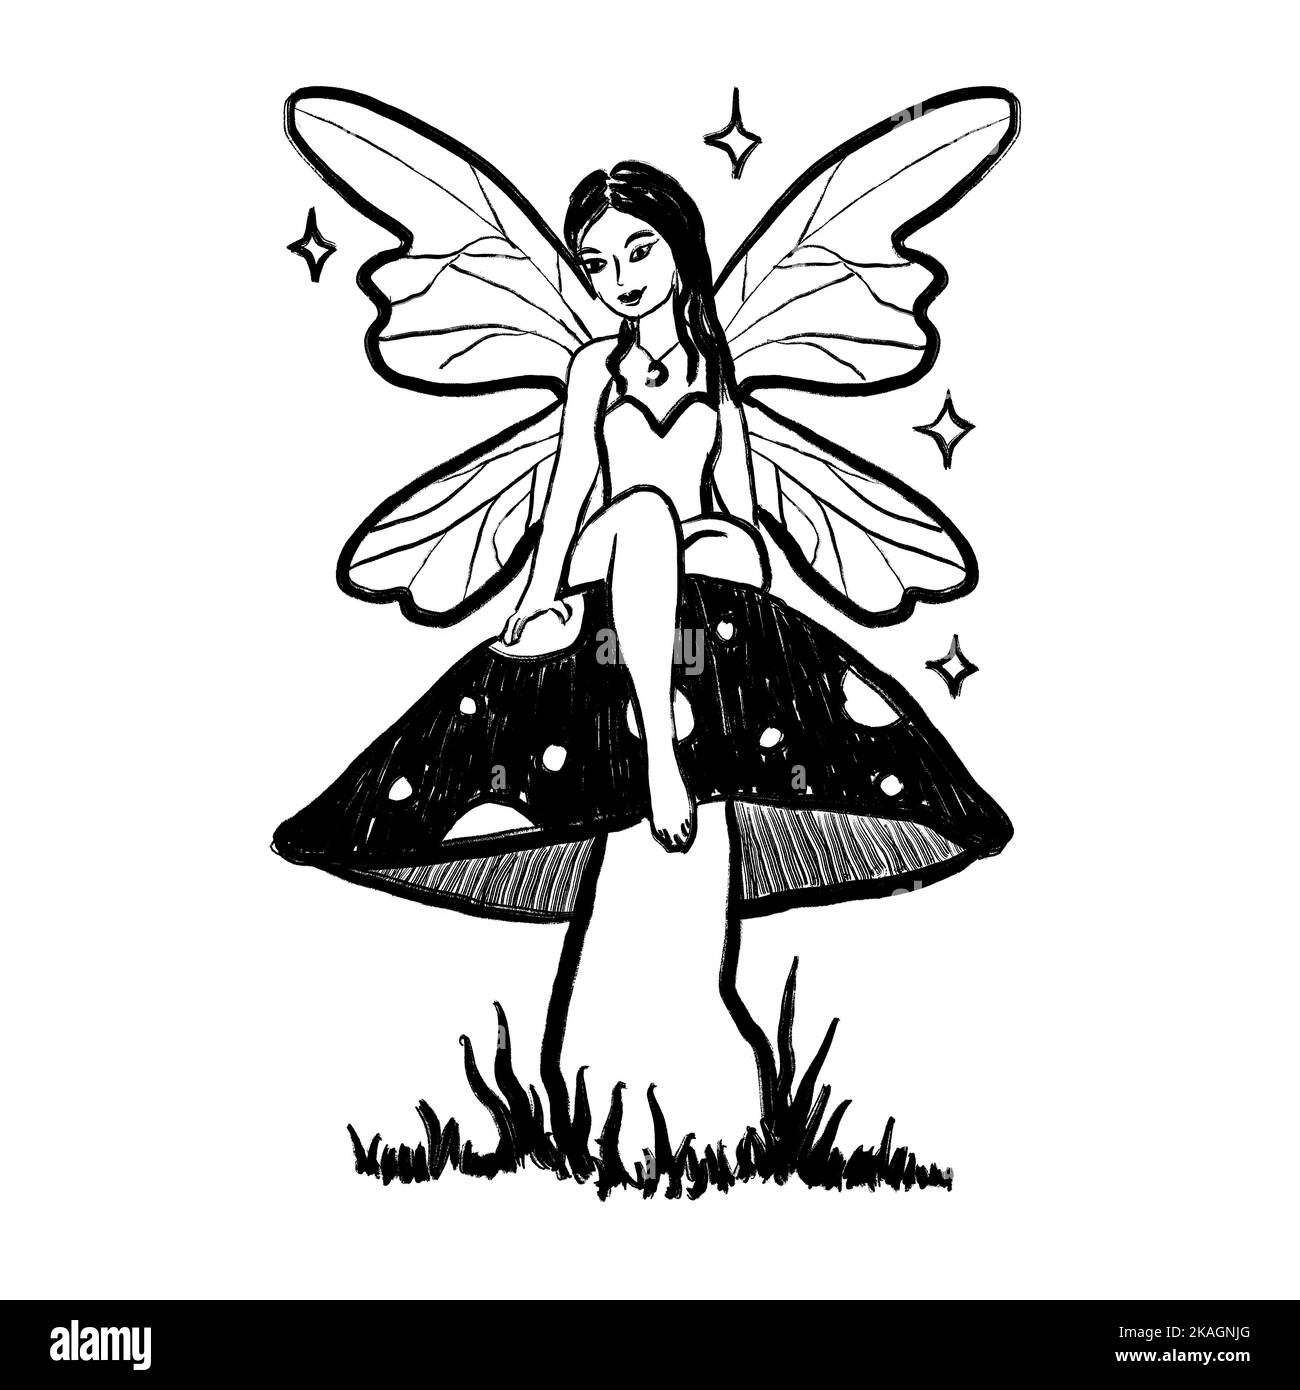 Cute fairy sitting on mushroom, white glitter wings, folklore character elf, fairytale amanita poisonous magic fungi. Black white monocrome ink sketch illustration, minimalist drawing with simple brush strokes Stock Photo